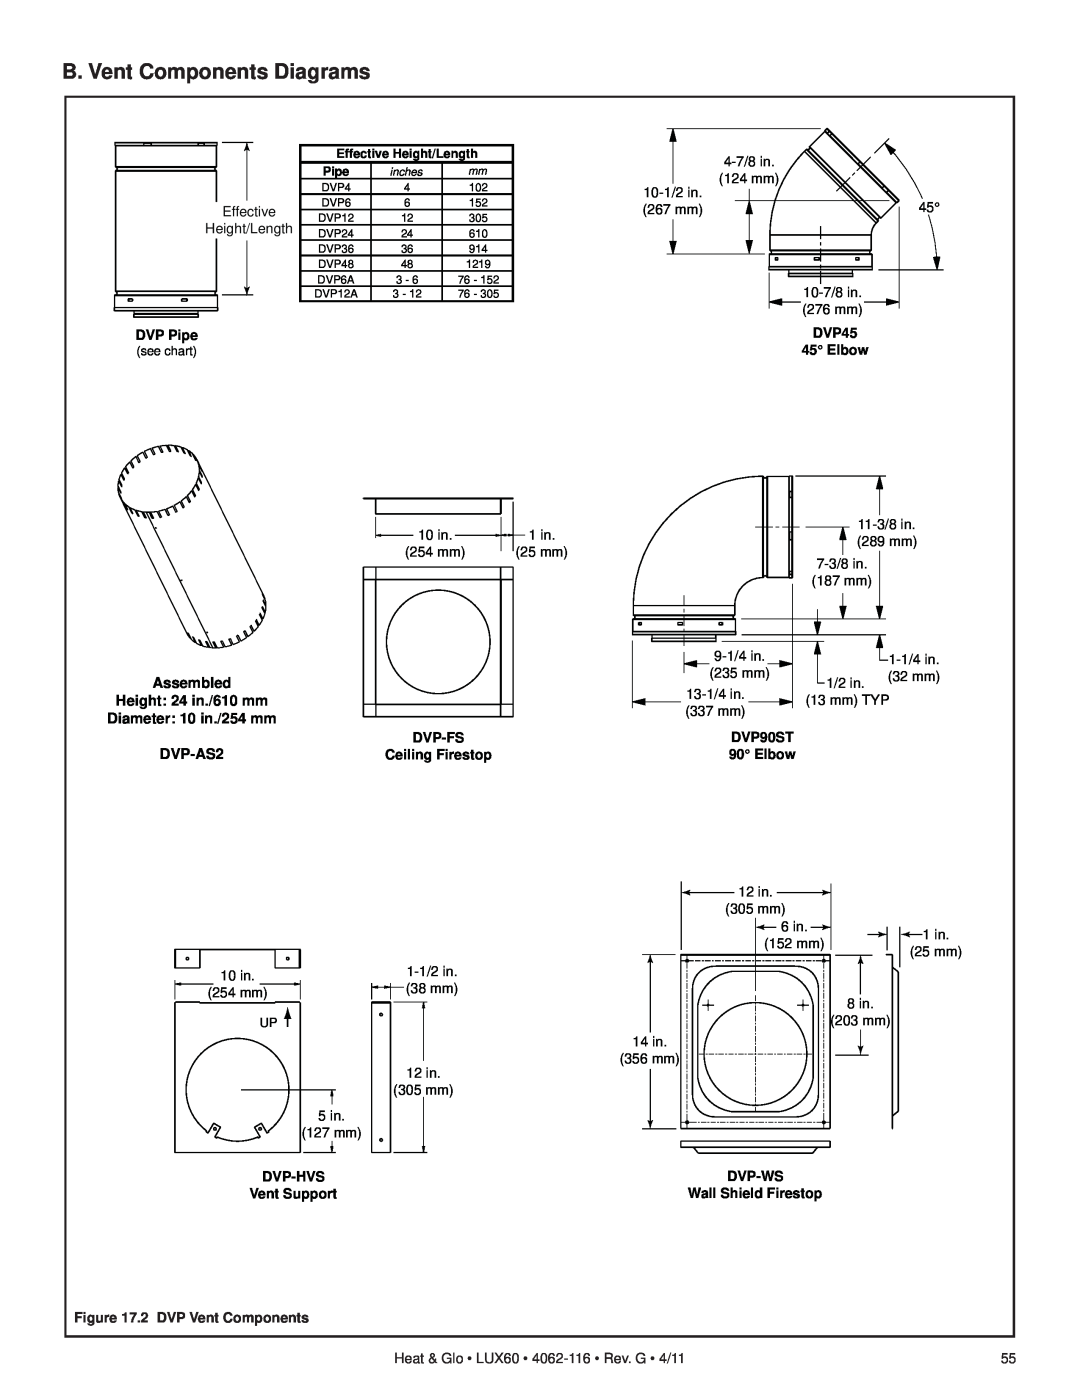 Heat & Glo LifeStyle LUX60 B. Vent Components Diagrams, 124 mm, 10-1/2in, 267 mm, Height/Length, 10-7/8in, 276 mm, DVP45 